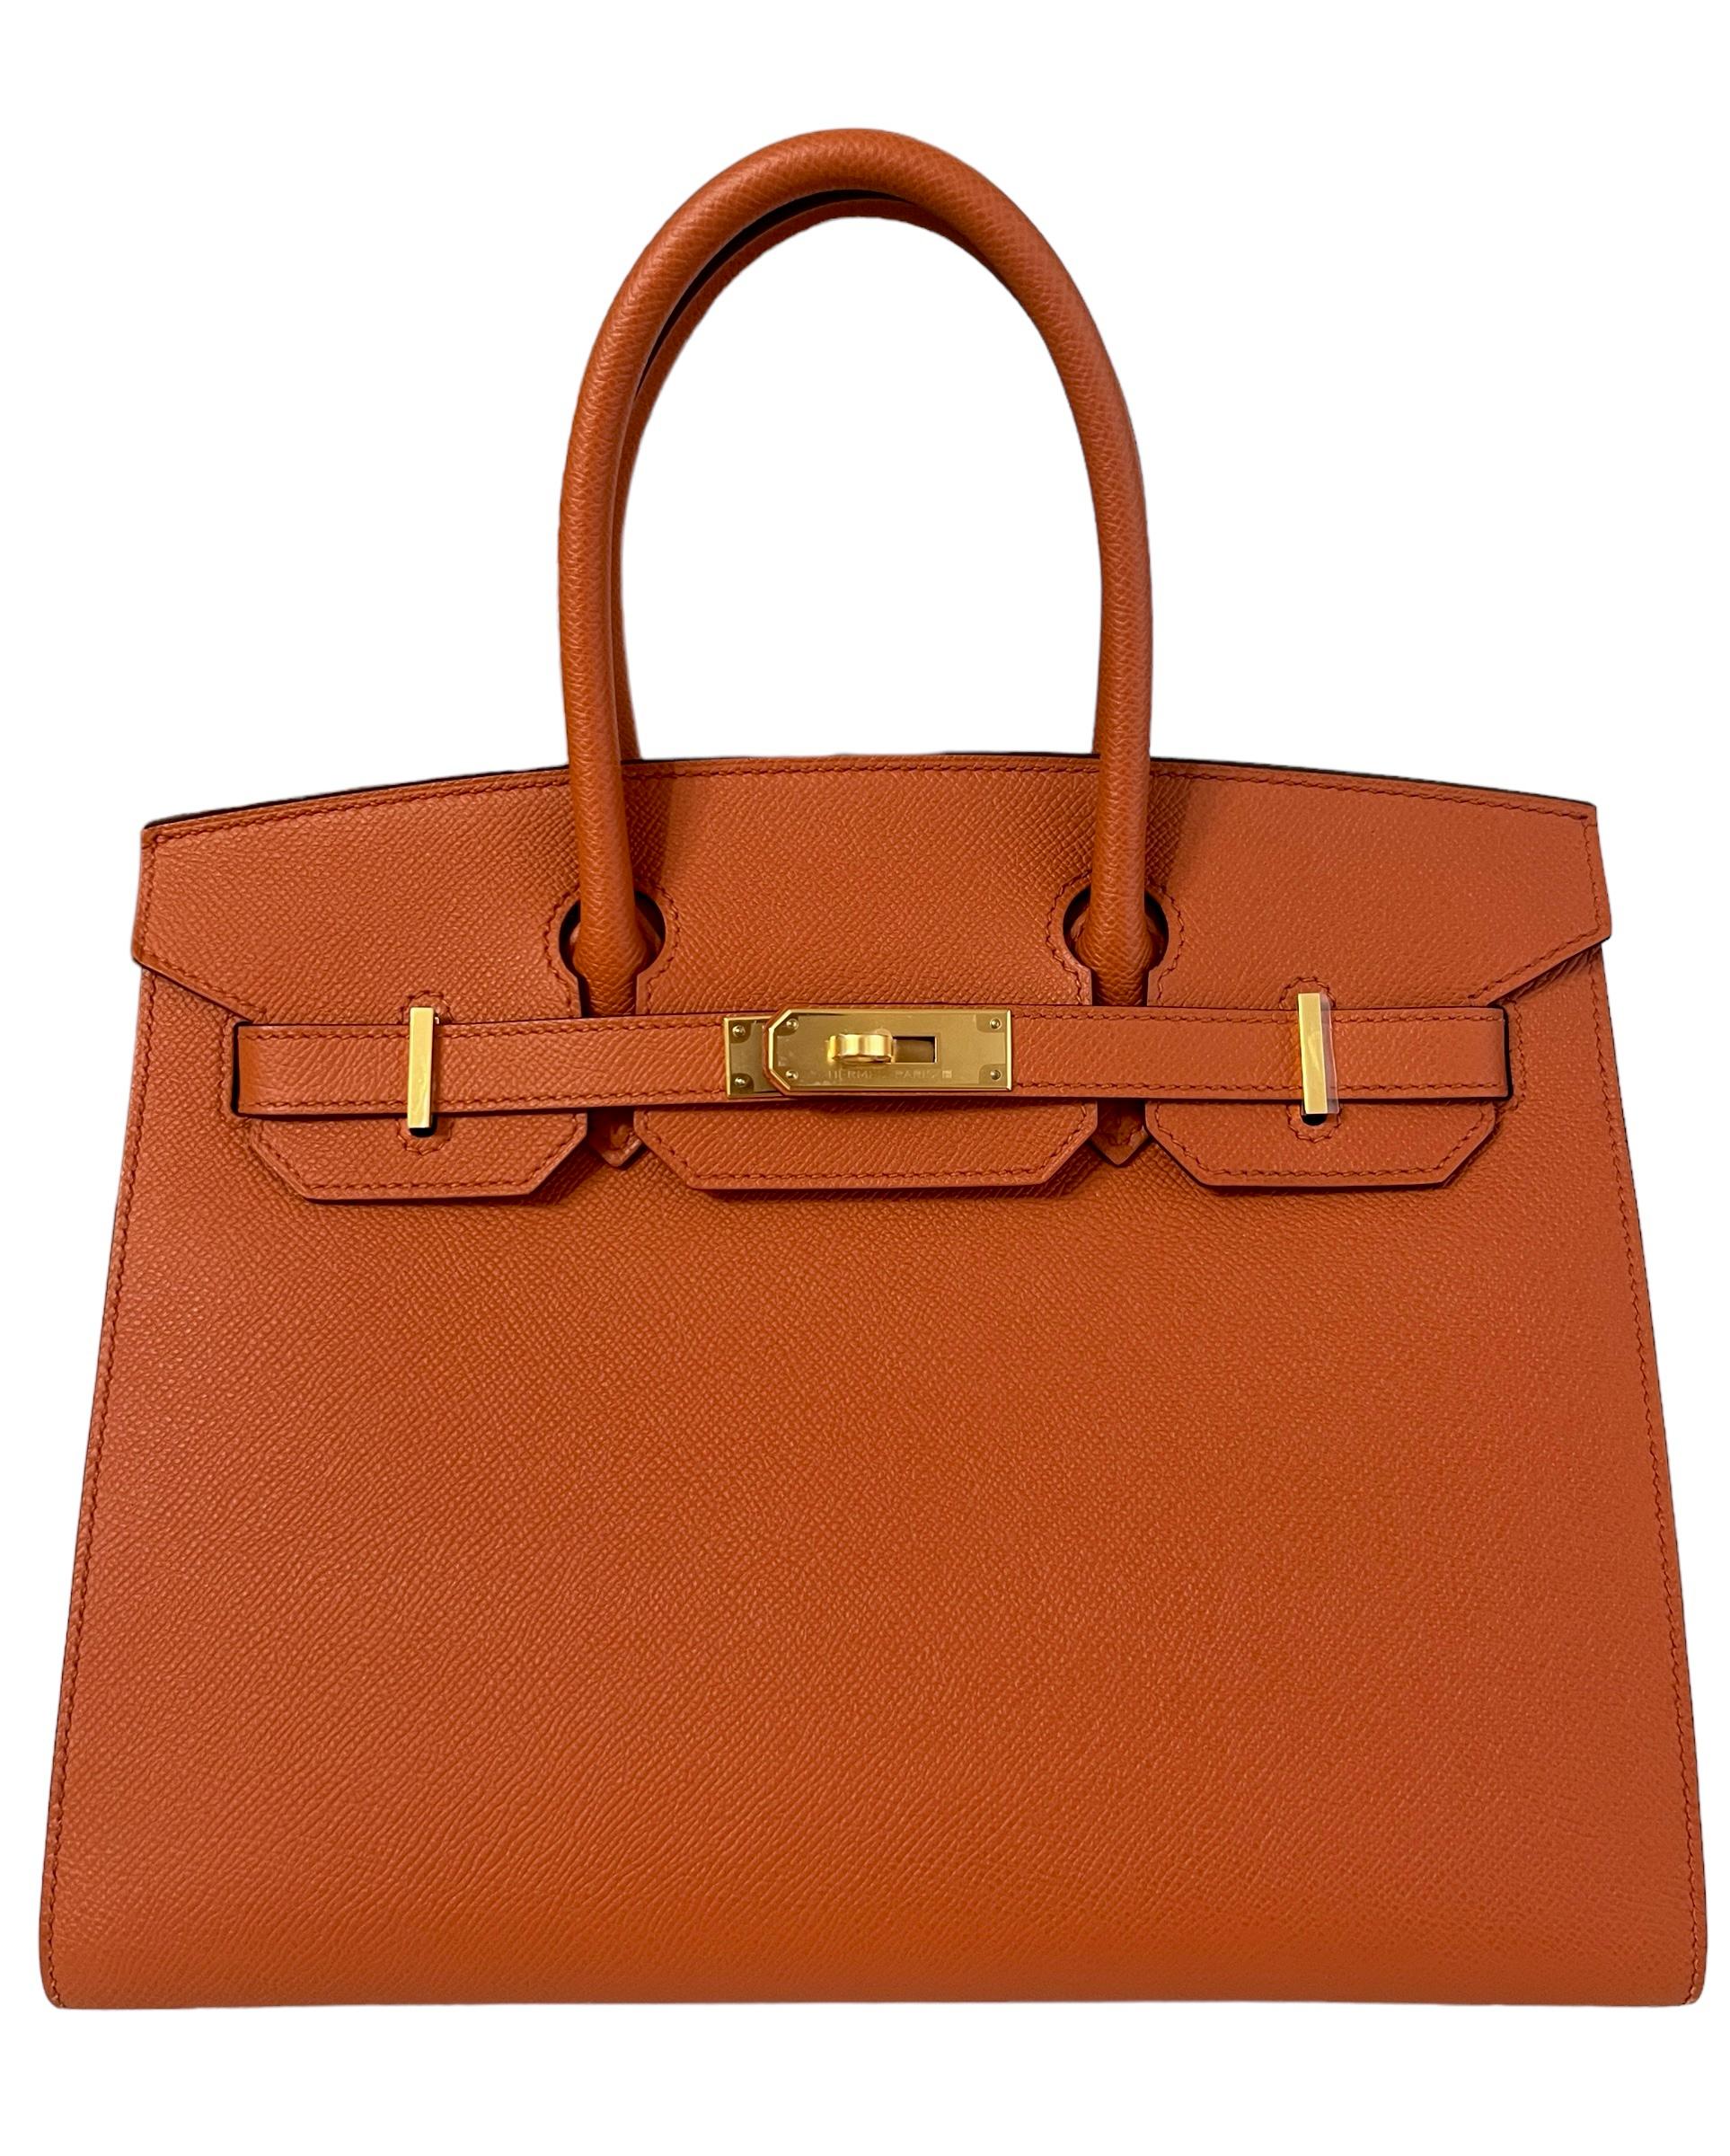 As New Absolutely Stunning Rare Limited Edition Hermes Birkin 30 Sellier Terre Battue. Complimented by Epsom Leather and Gold Hardware. Y Stamp 2020. 

Shop with Confidence from Lux Addicts. Authenticity Guaranteed! 

Lux Addicts is a Premier Luxury